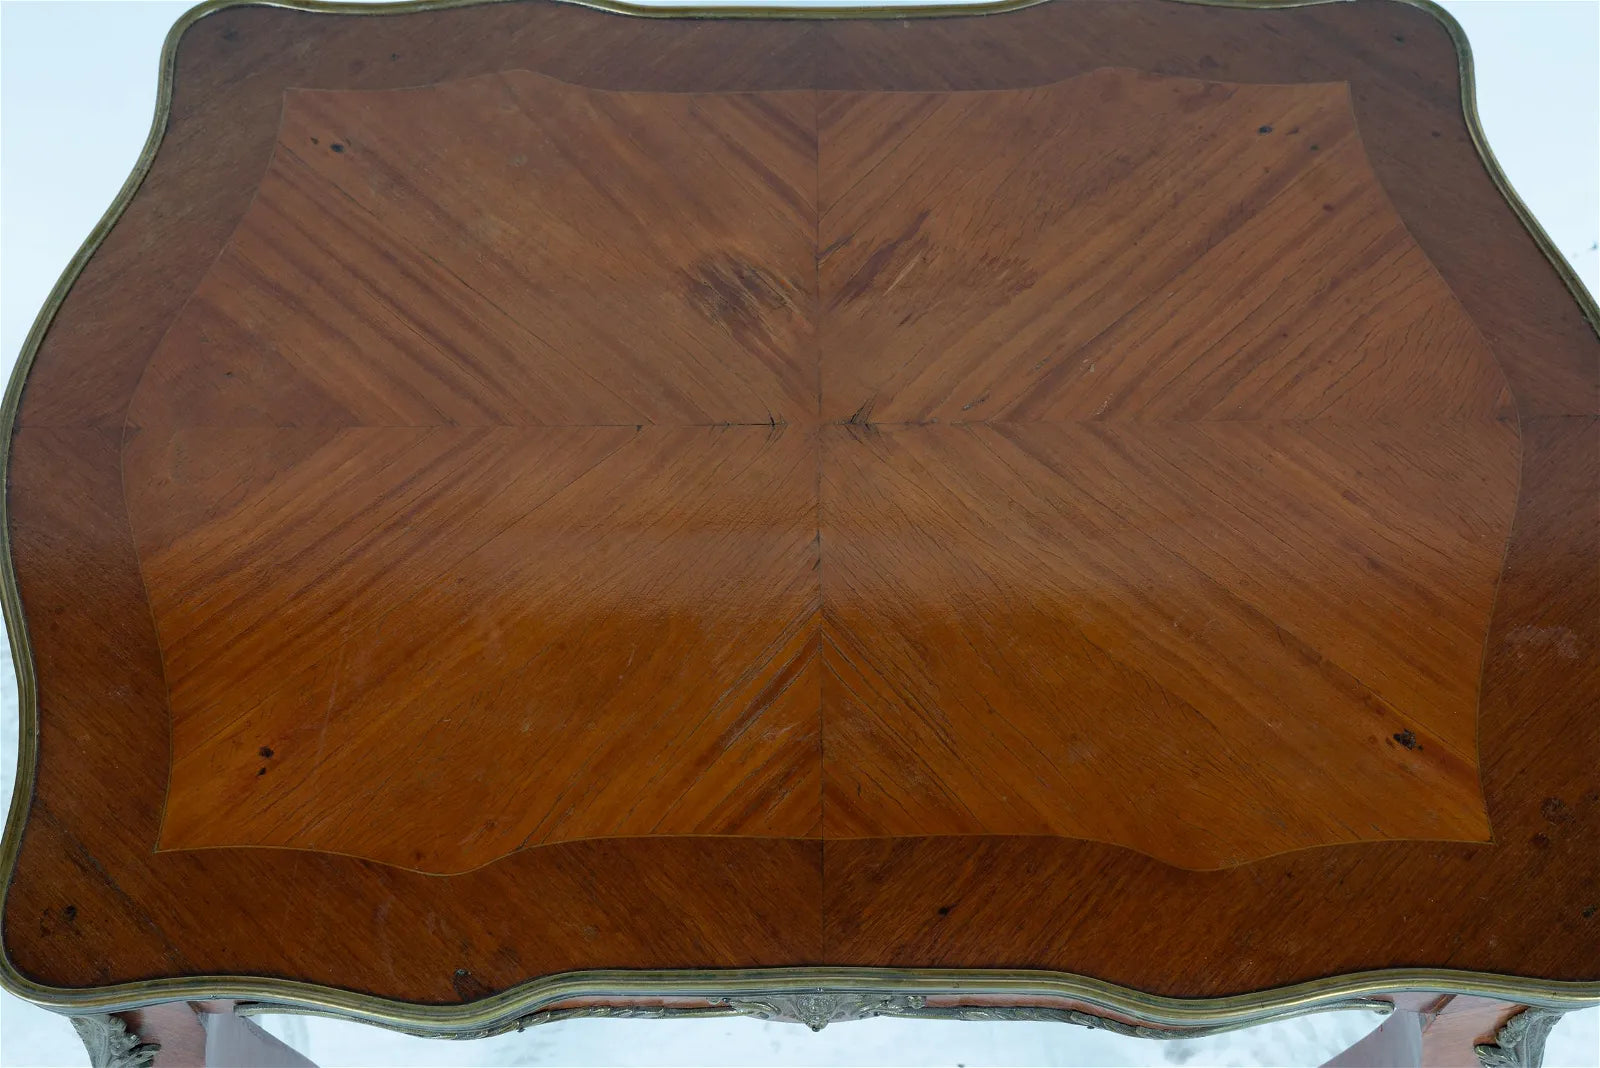 AF1-025:  ANTIQUE LATE 19TH CENTURY LOUIS XV  STYLE FRENCH KINGWOOD MARQUETRY SALON TABLE